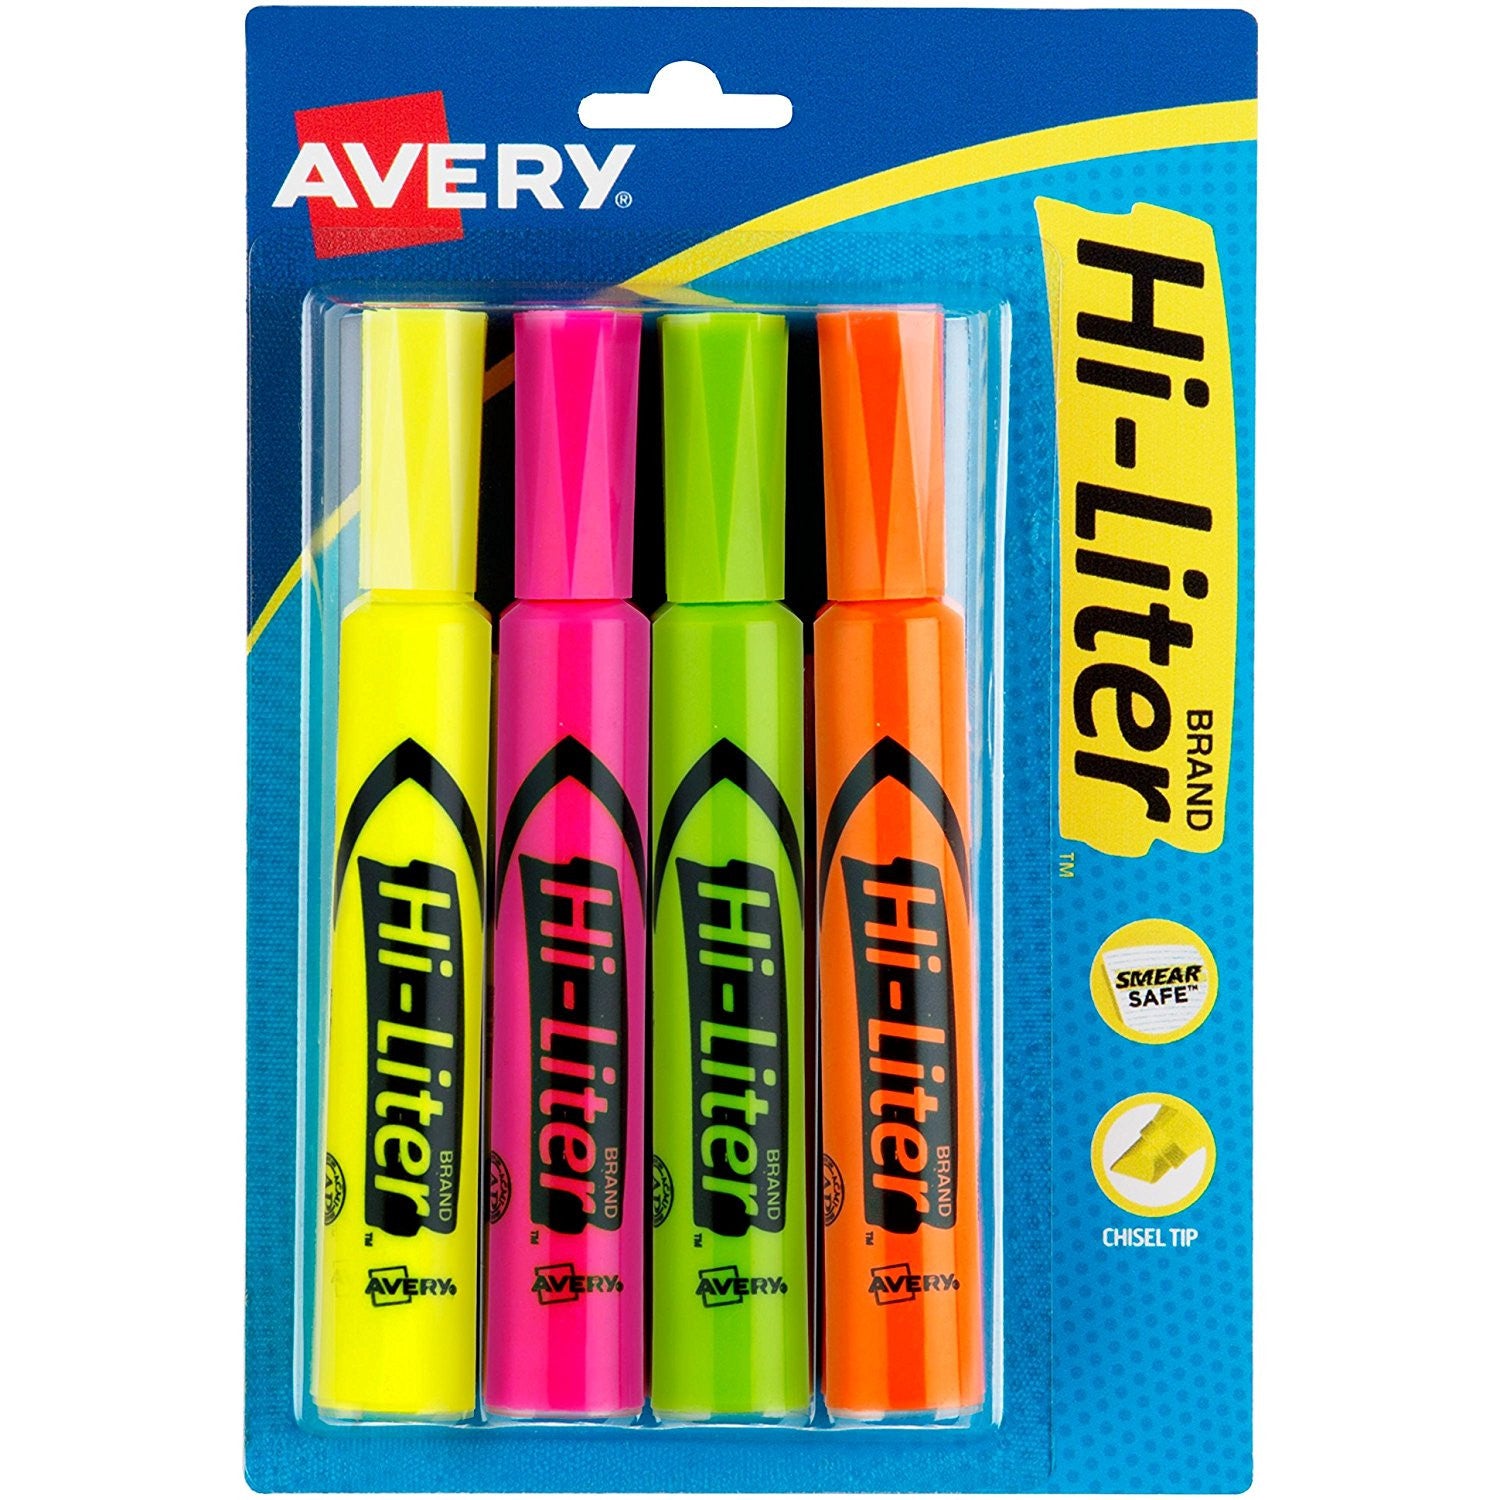 Avery Hi-liters 4 Pack, Desk Style Chisel Tip Highlighters Asst Colors (24063)